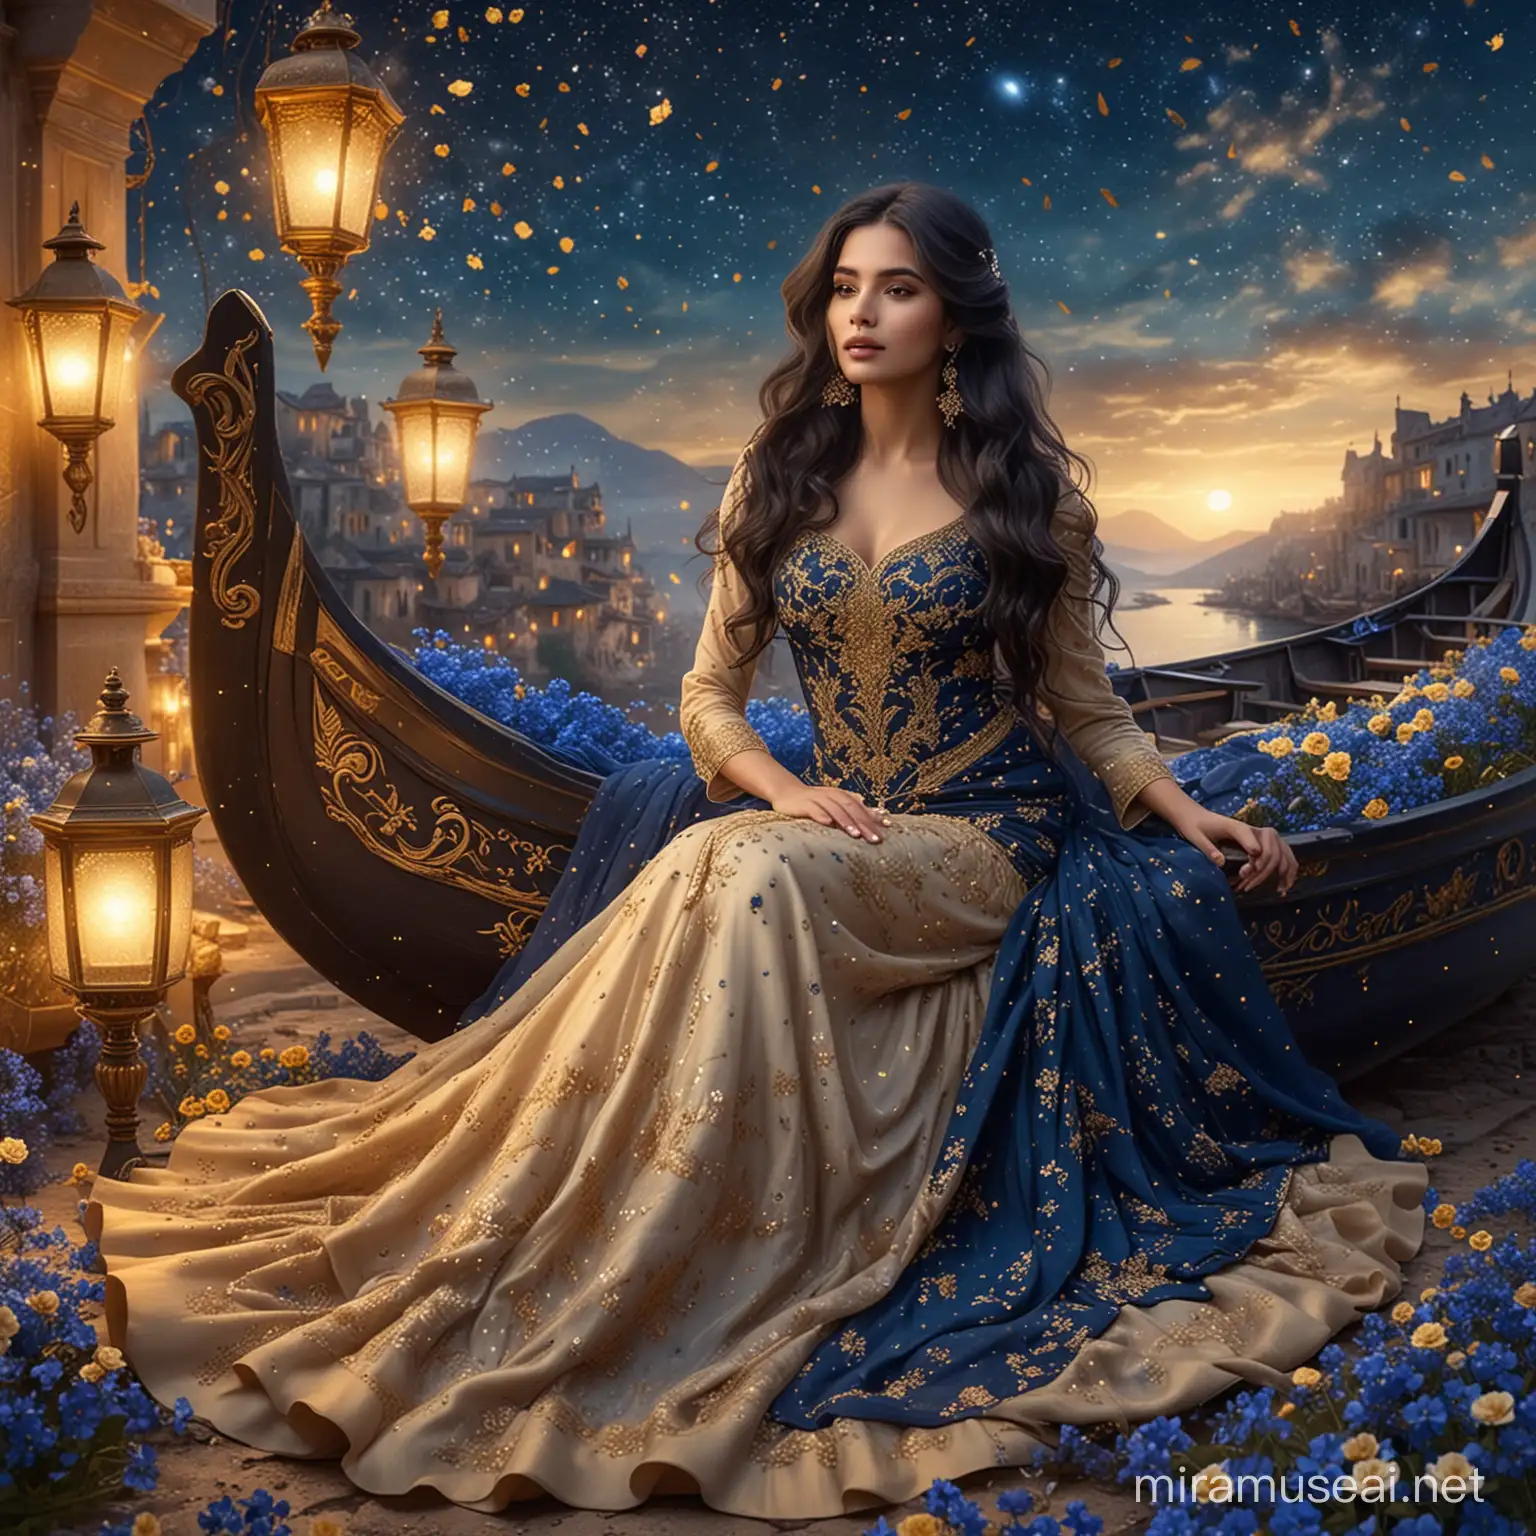 Elegant Woman on Floral Boat in Enchanted Flower Realm